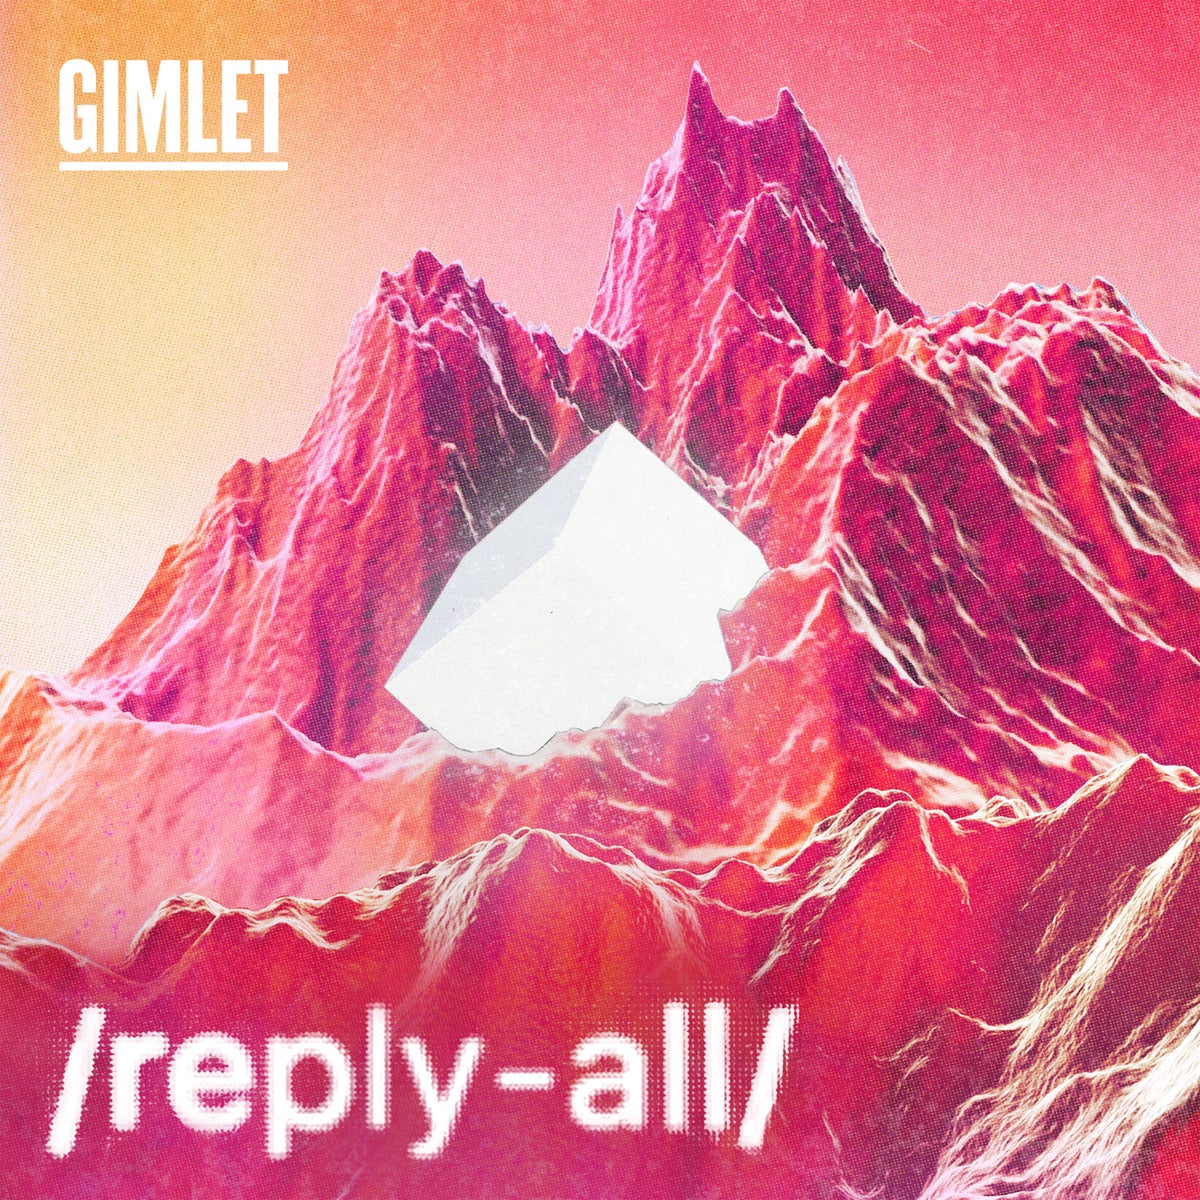 Reply All podcast